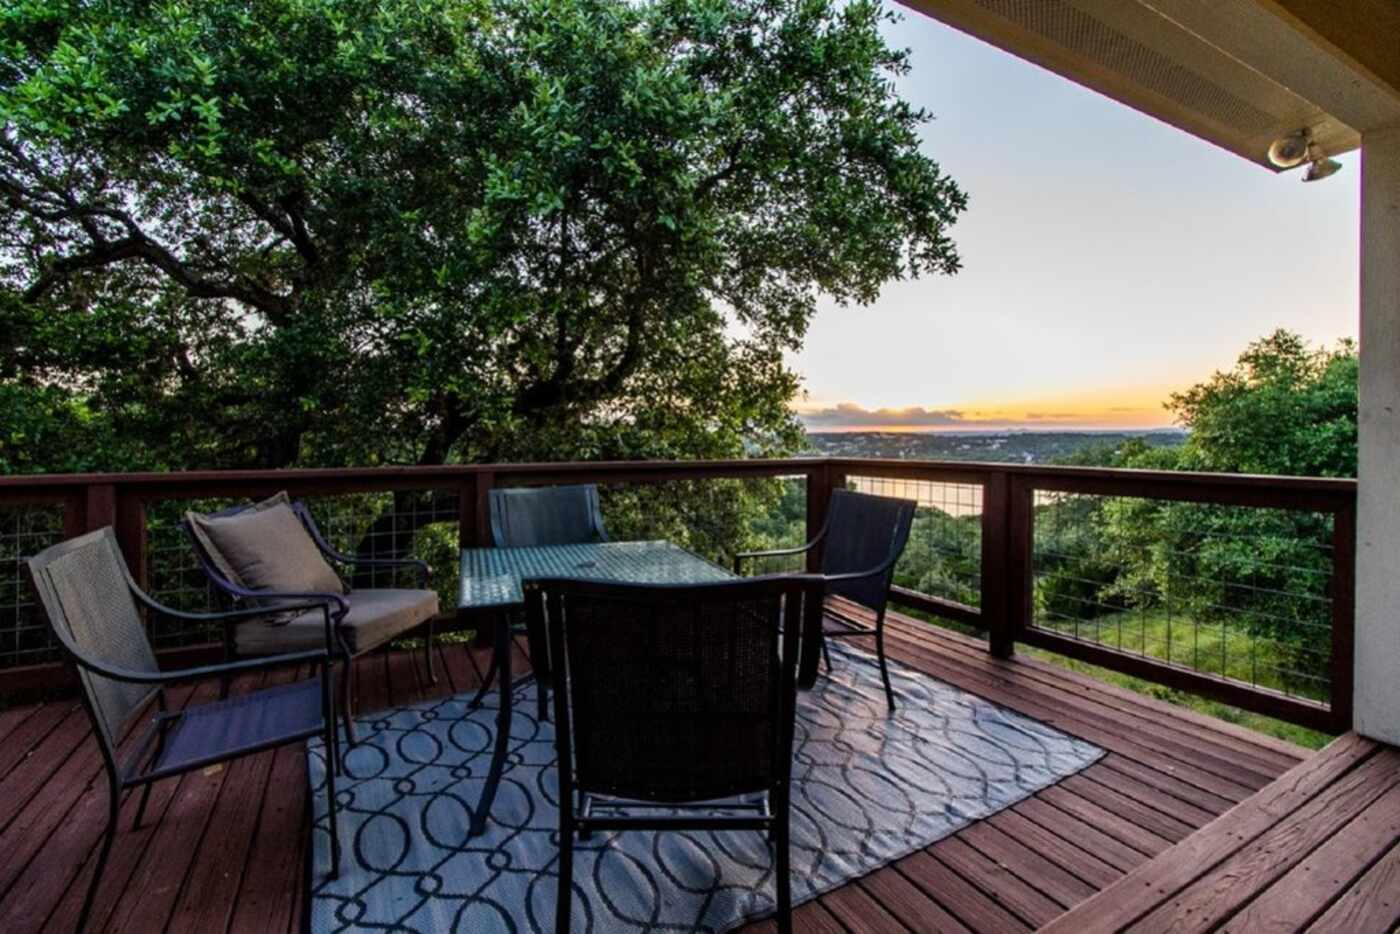 A look at the Sunset Coast listing in VRBO